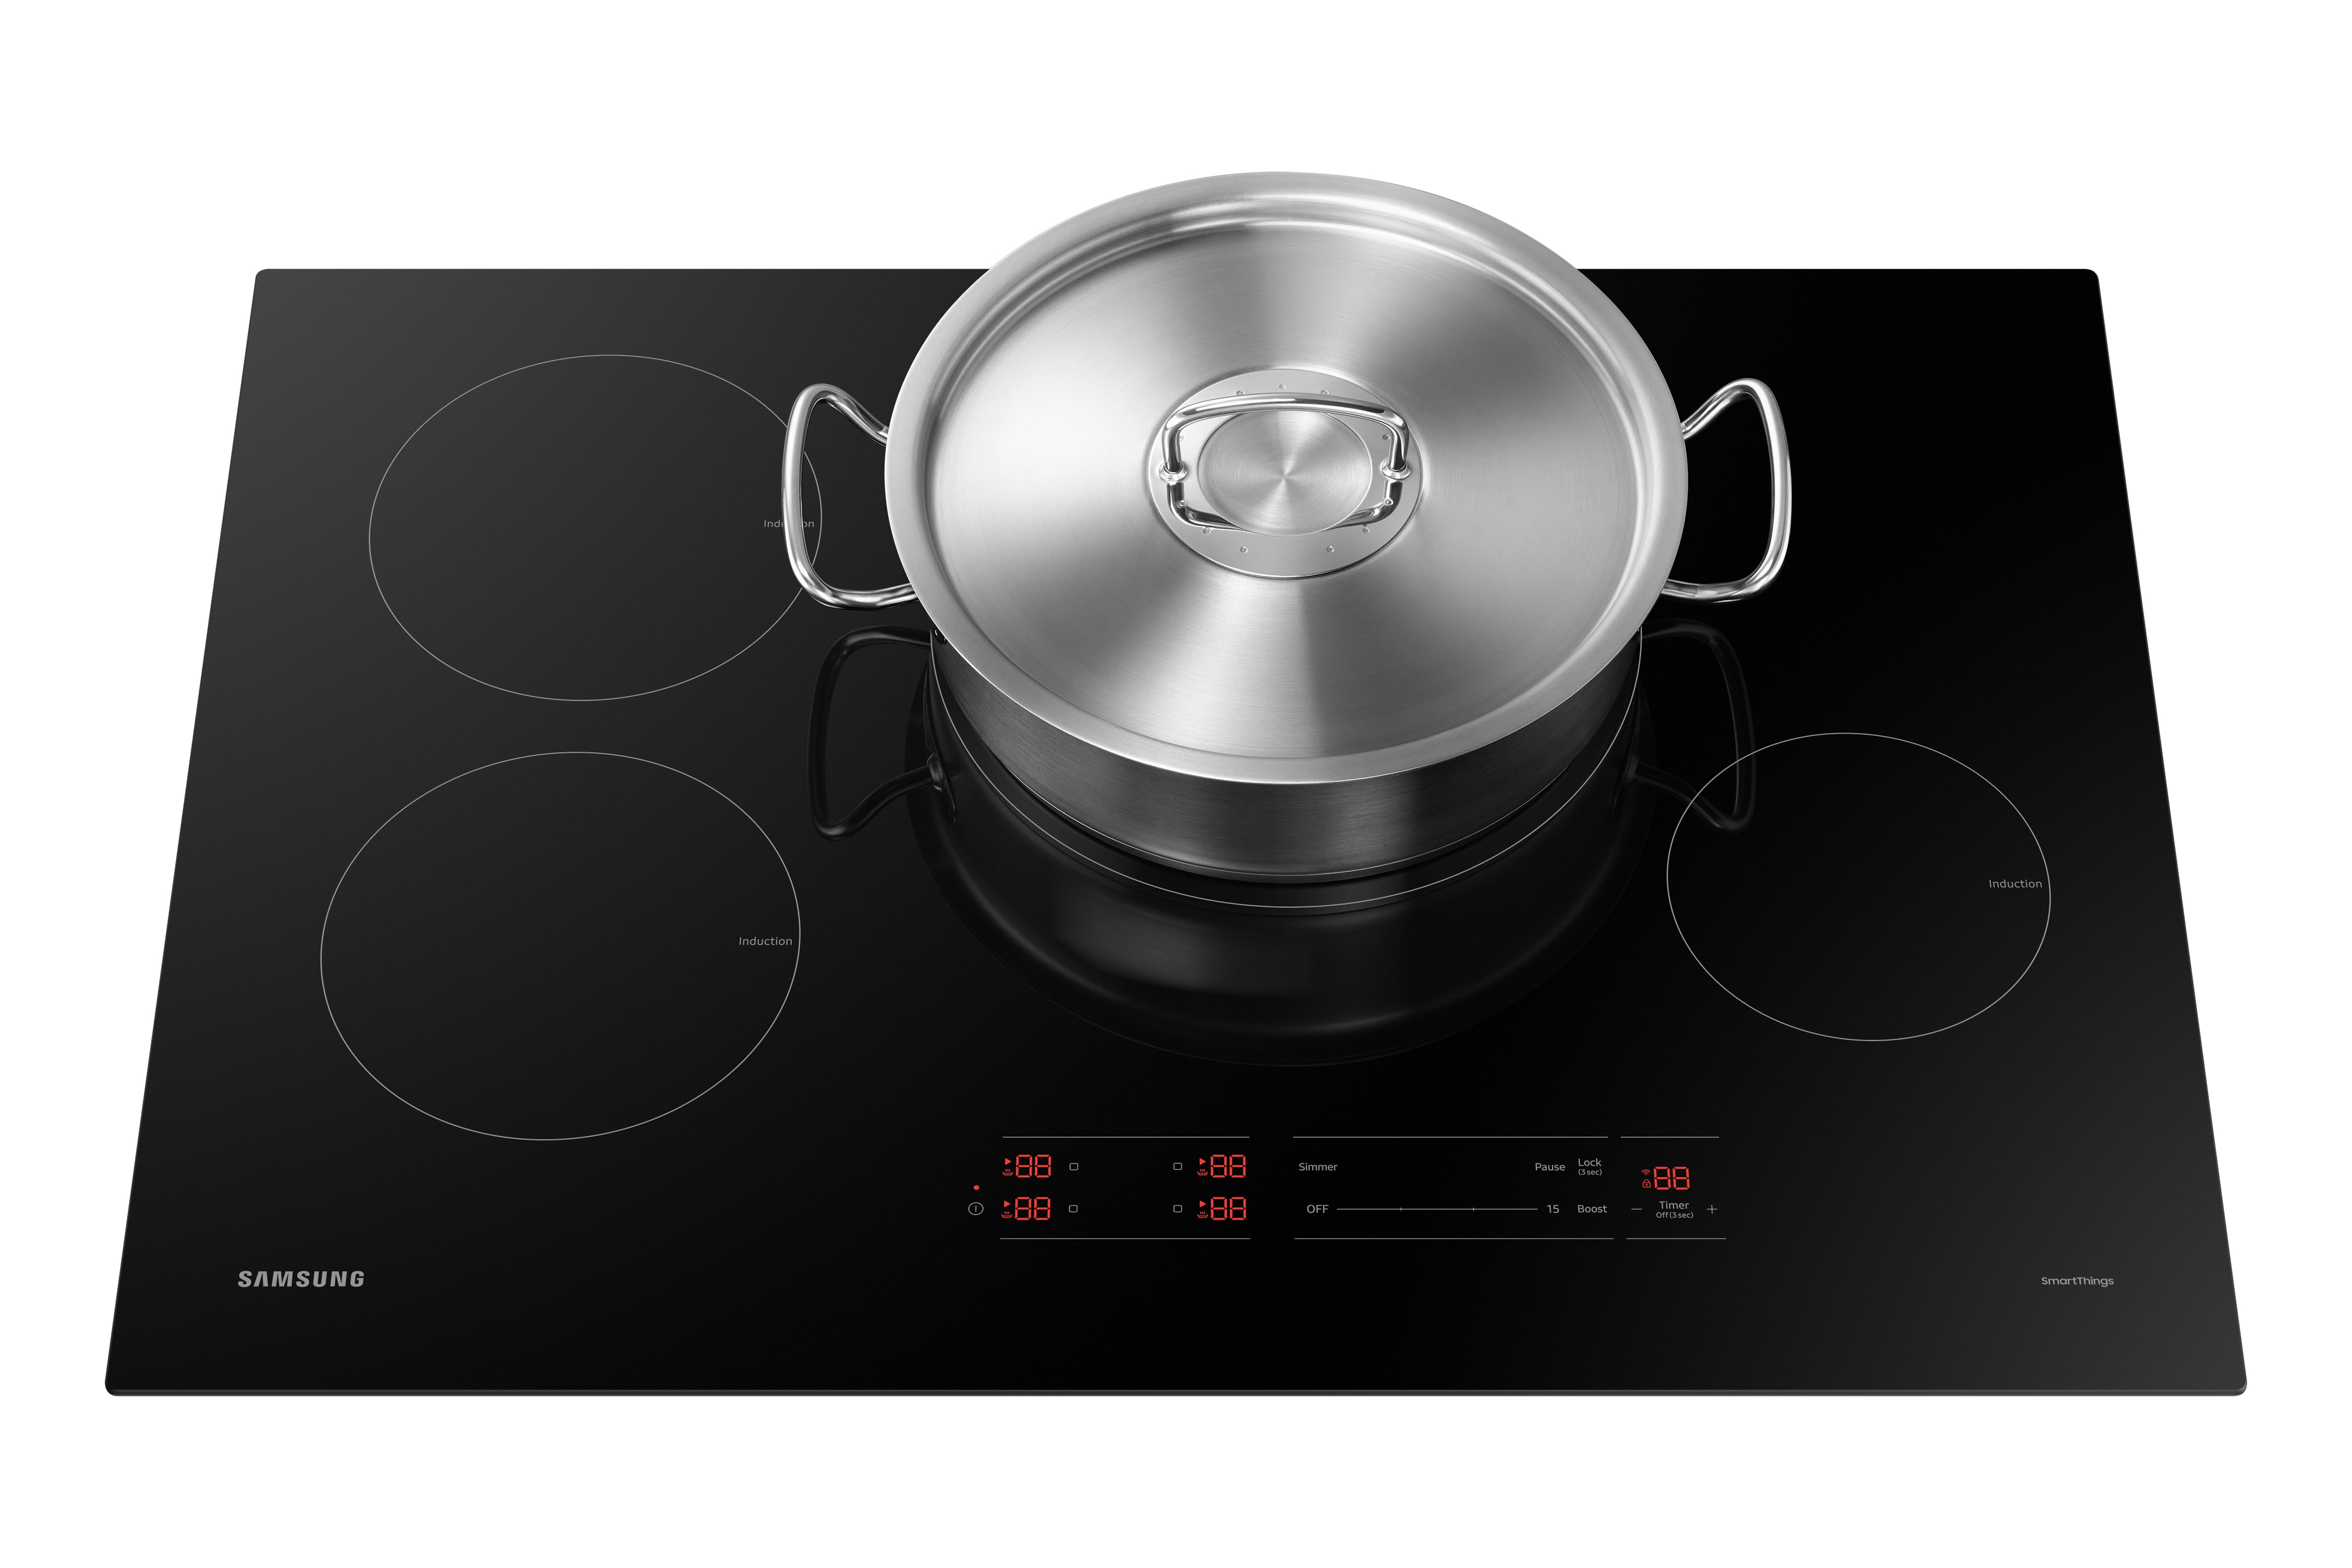 Samsung - 30 inch wide Induction Cooktop in Black - NZ30A3060UK